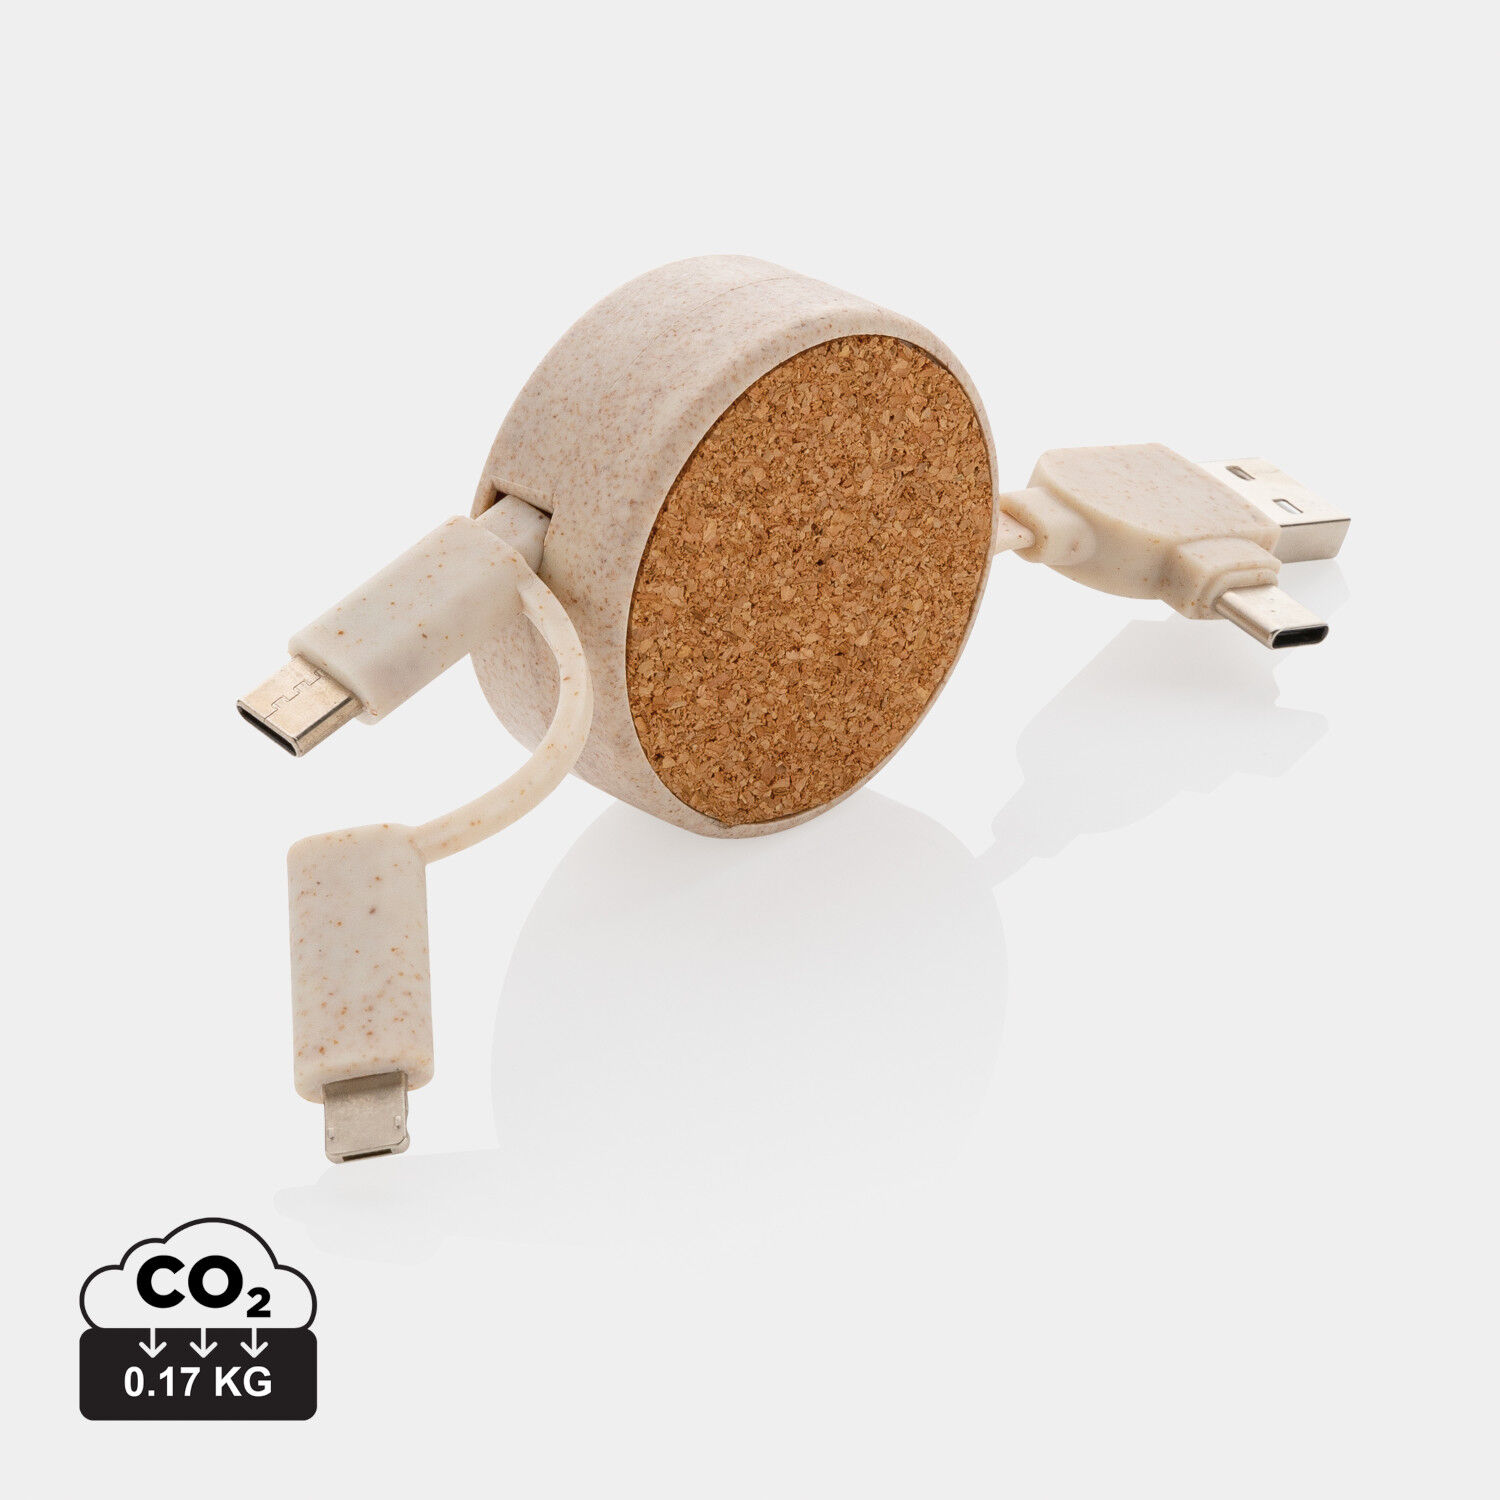 Cork and Wheat 6-in-1 Retractable Charging Cable